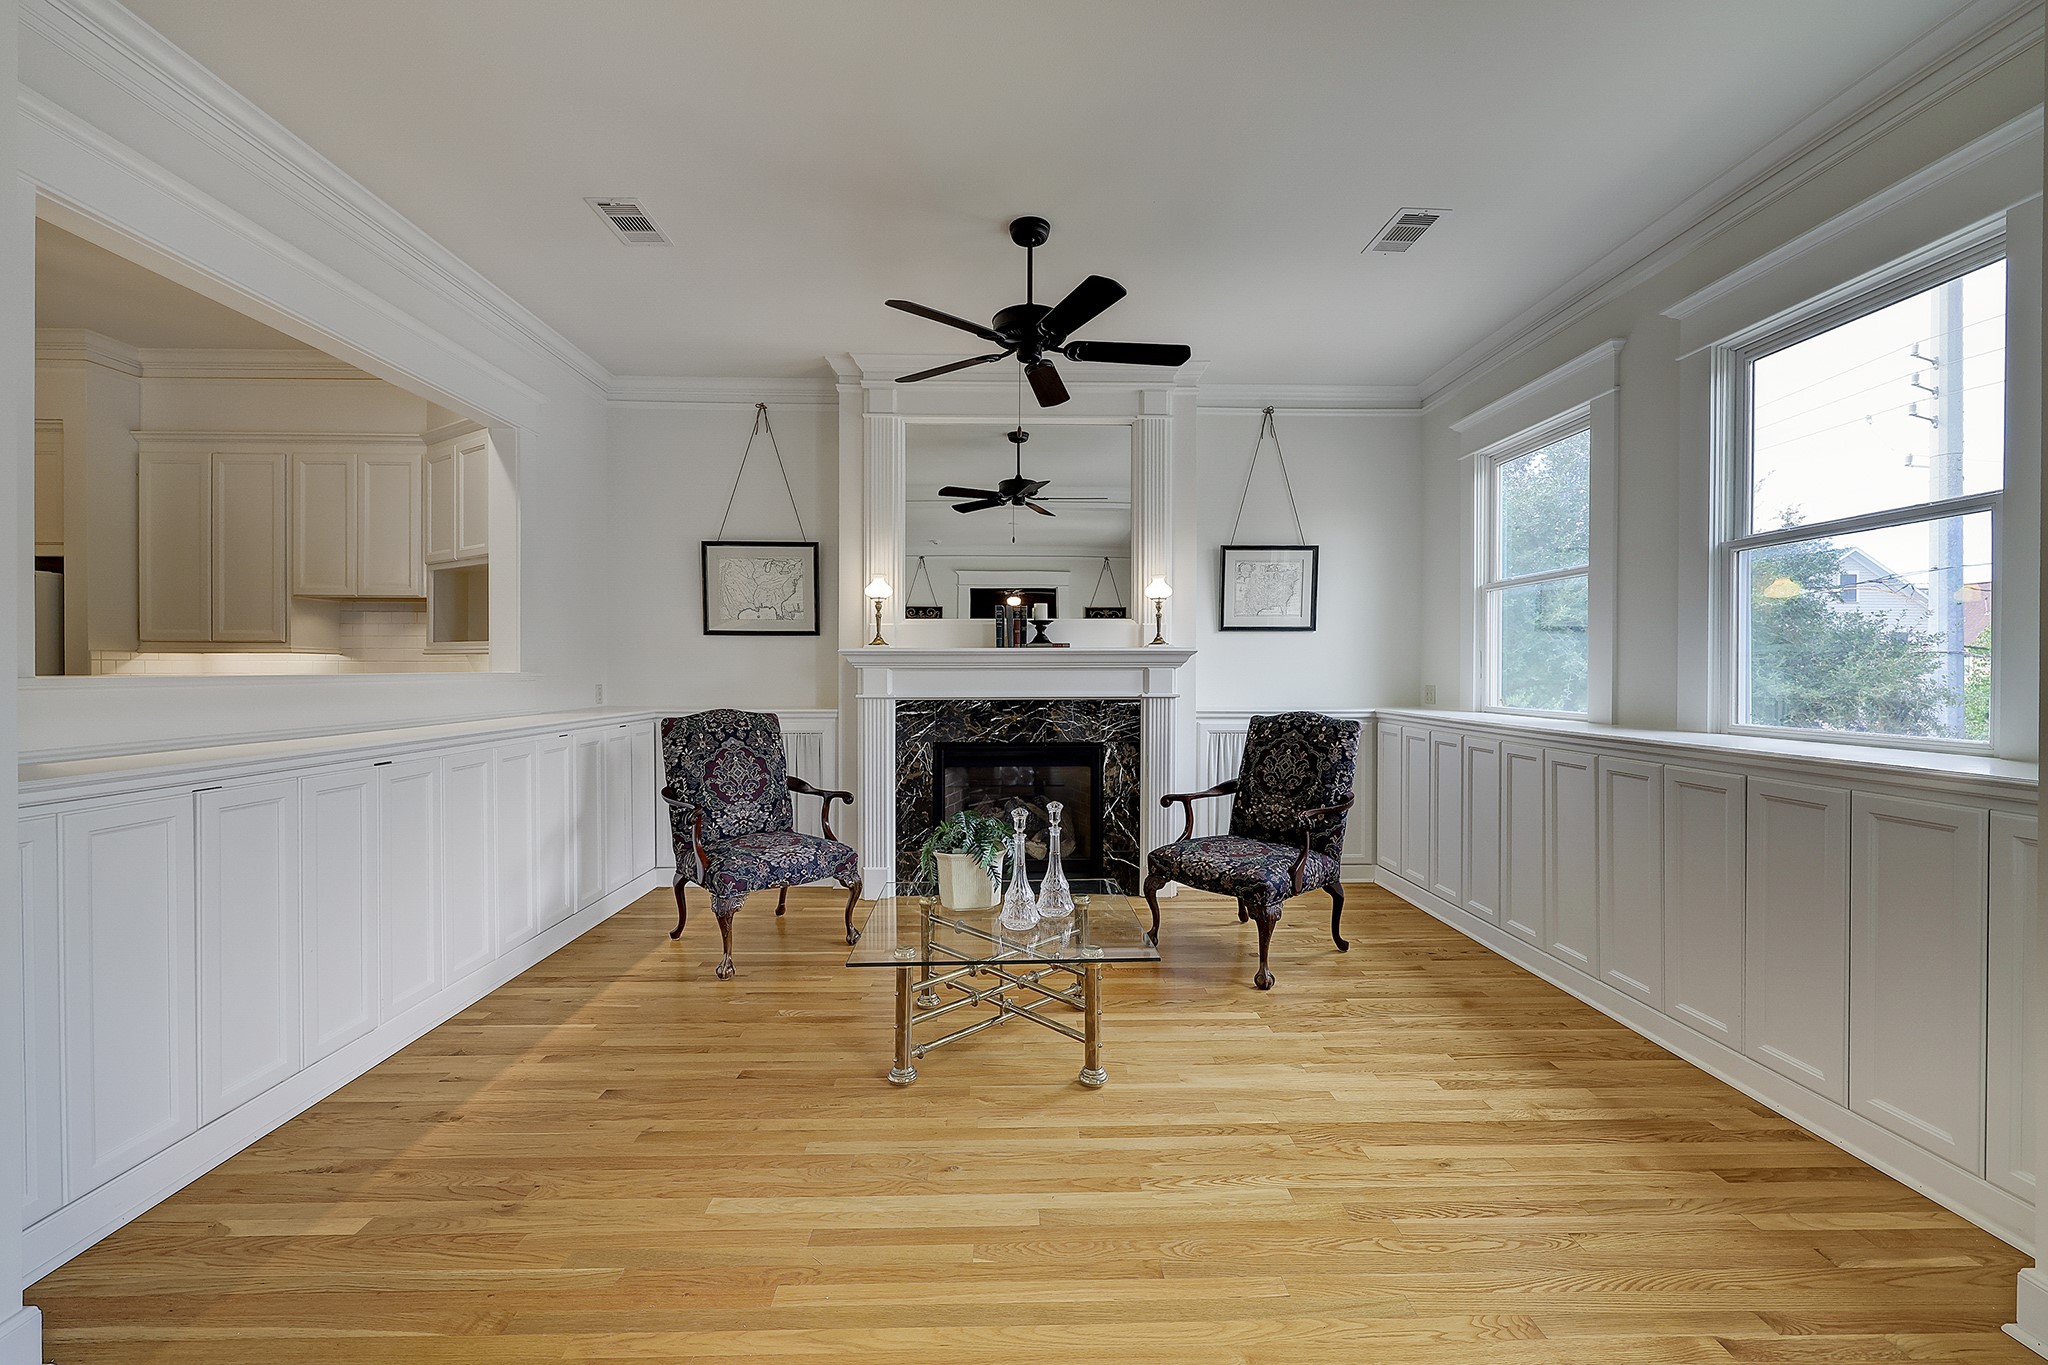 This comfortable home exudes quality and thoughtful design including furniture-grade built-ins for ample storage, crown molding, and picture
rail.